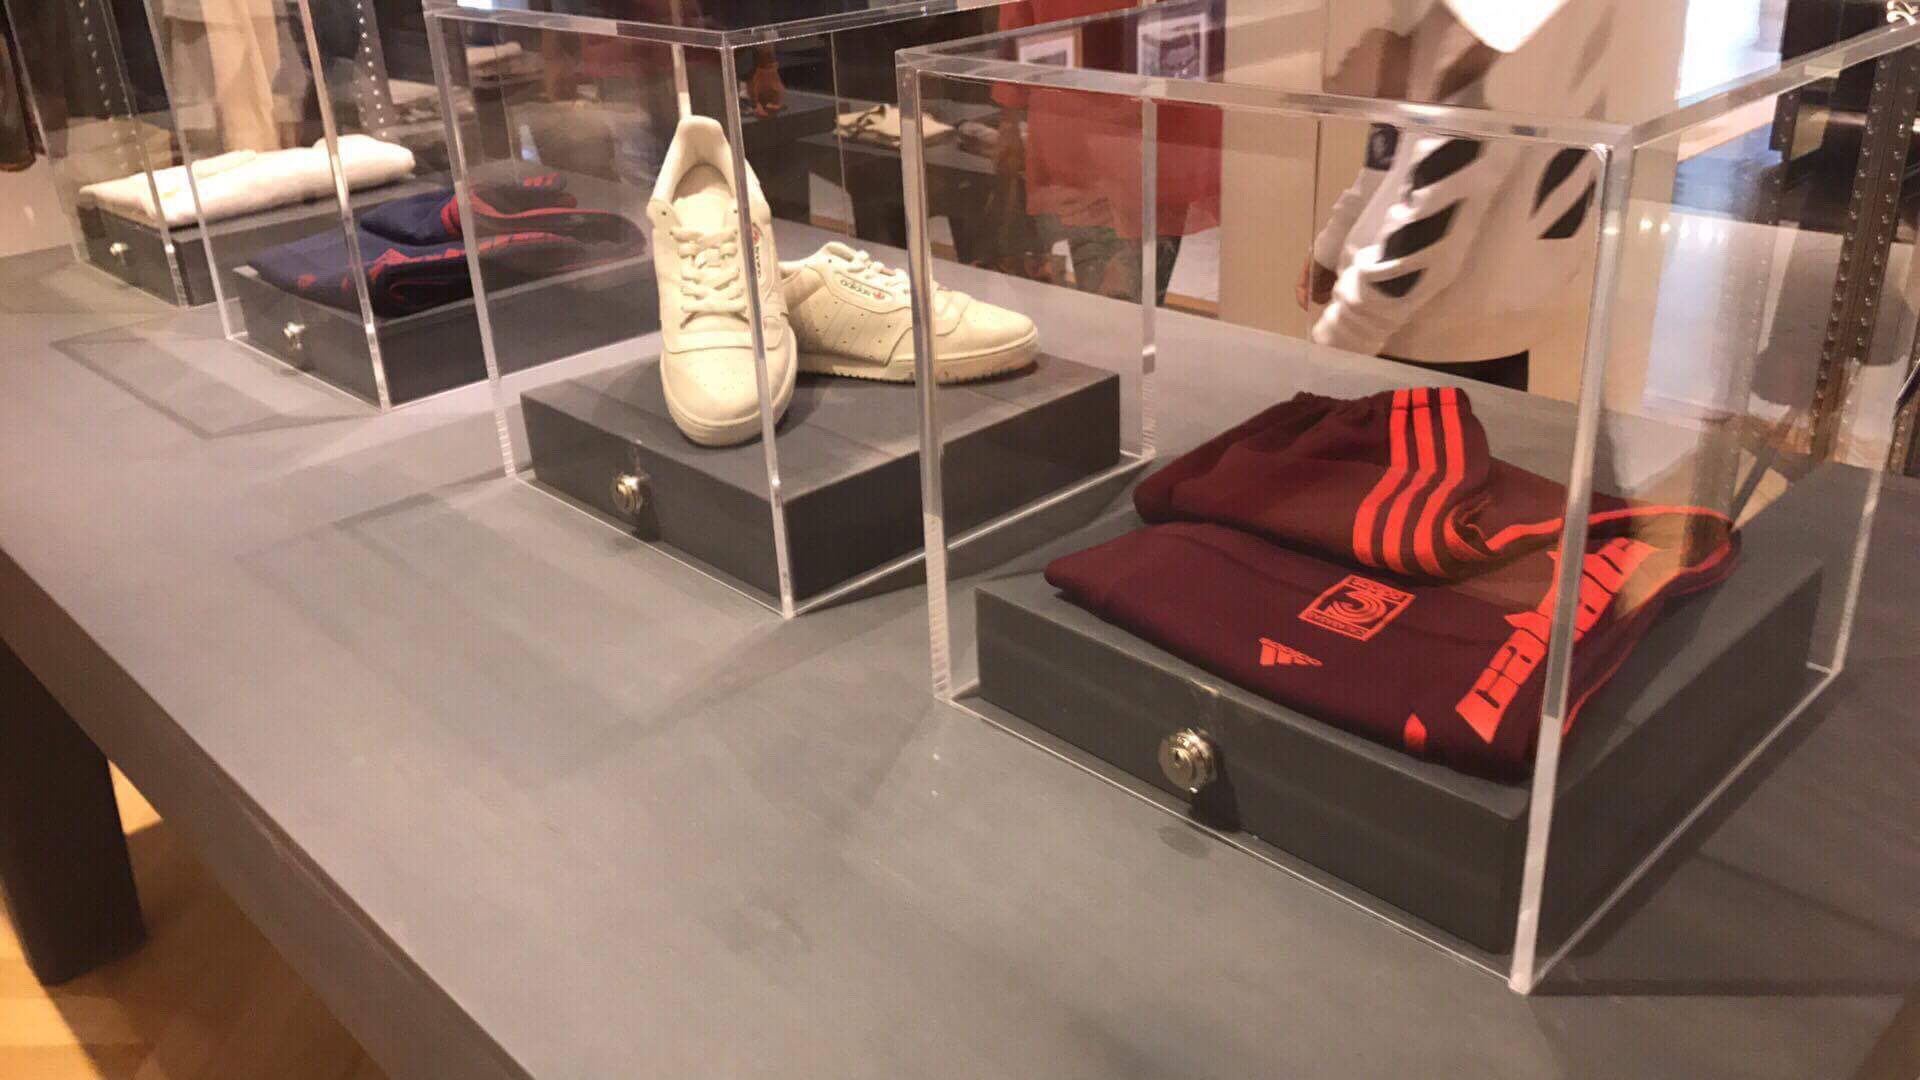 YEEZY MAFIA on "Selfridges London is getting the YEEZY POWERPHASE in store(100 pairs this week) be quick #MafiaSZN https://t.co/xbqppTE4H2" / Twitter